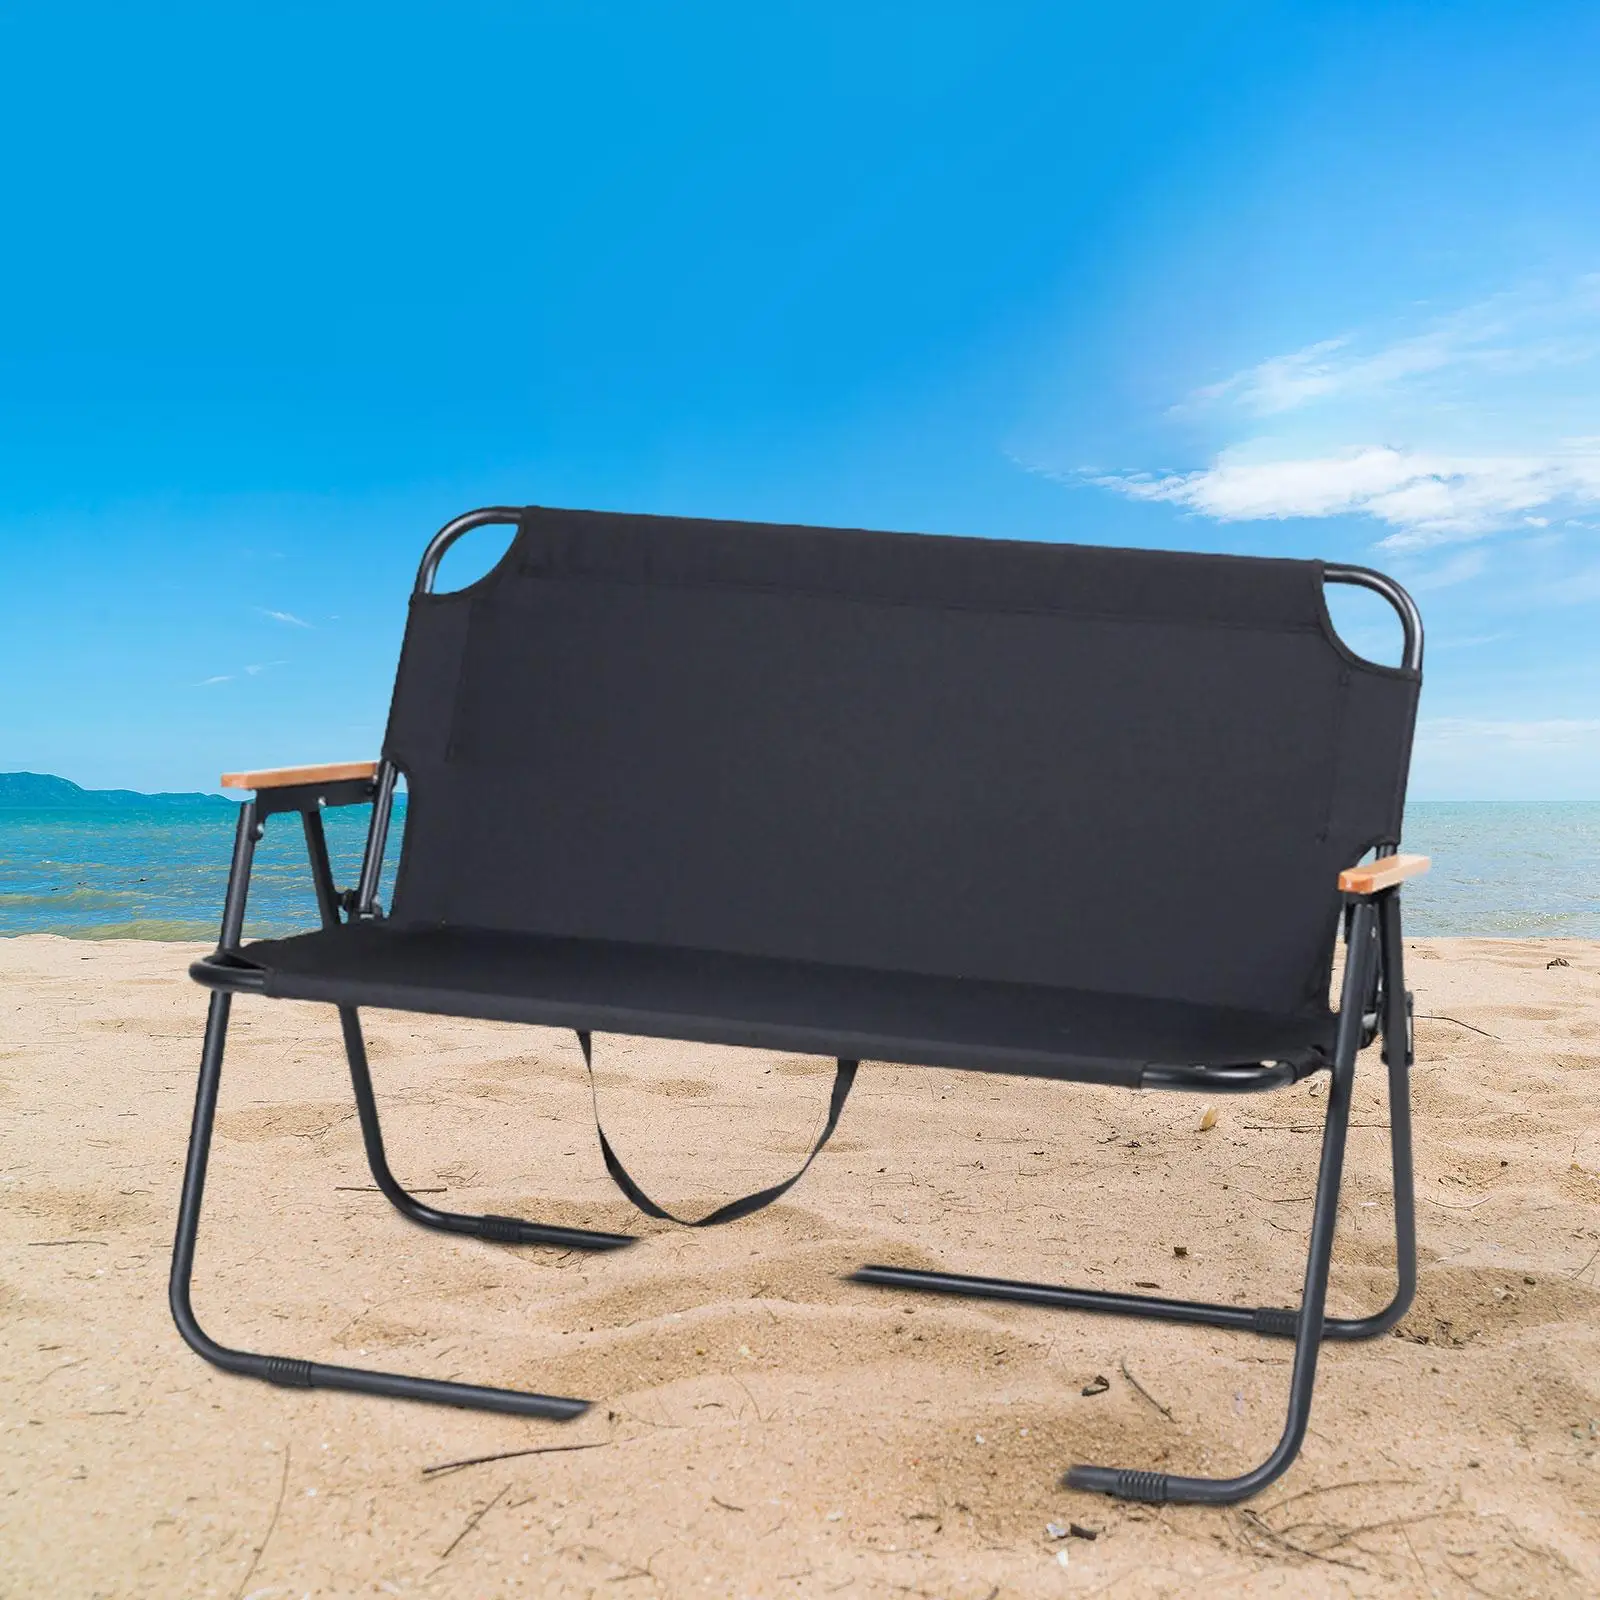 Folding Camping Chair Traveling Camping Seat Patio Hiking Outside Lightweight Camping Stool Chair Outdoor Beach Chair Armchair